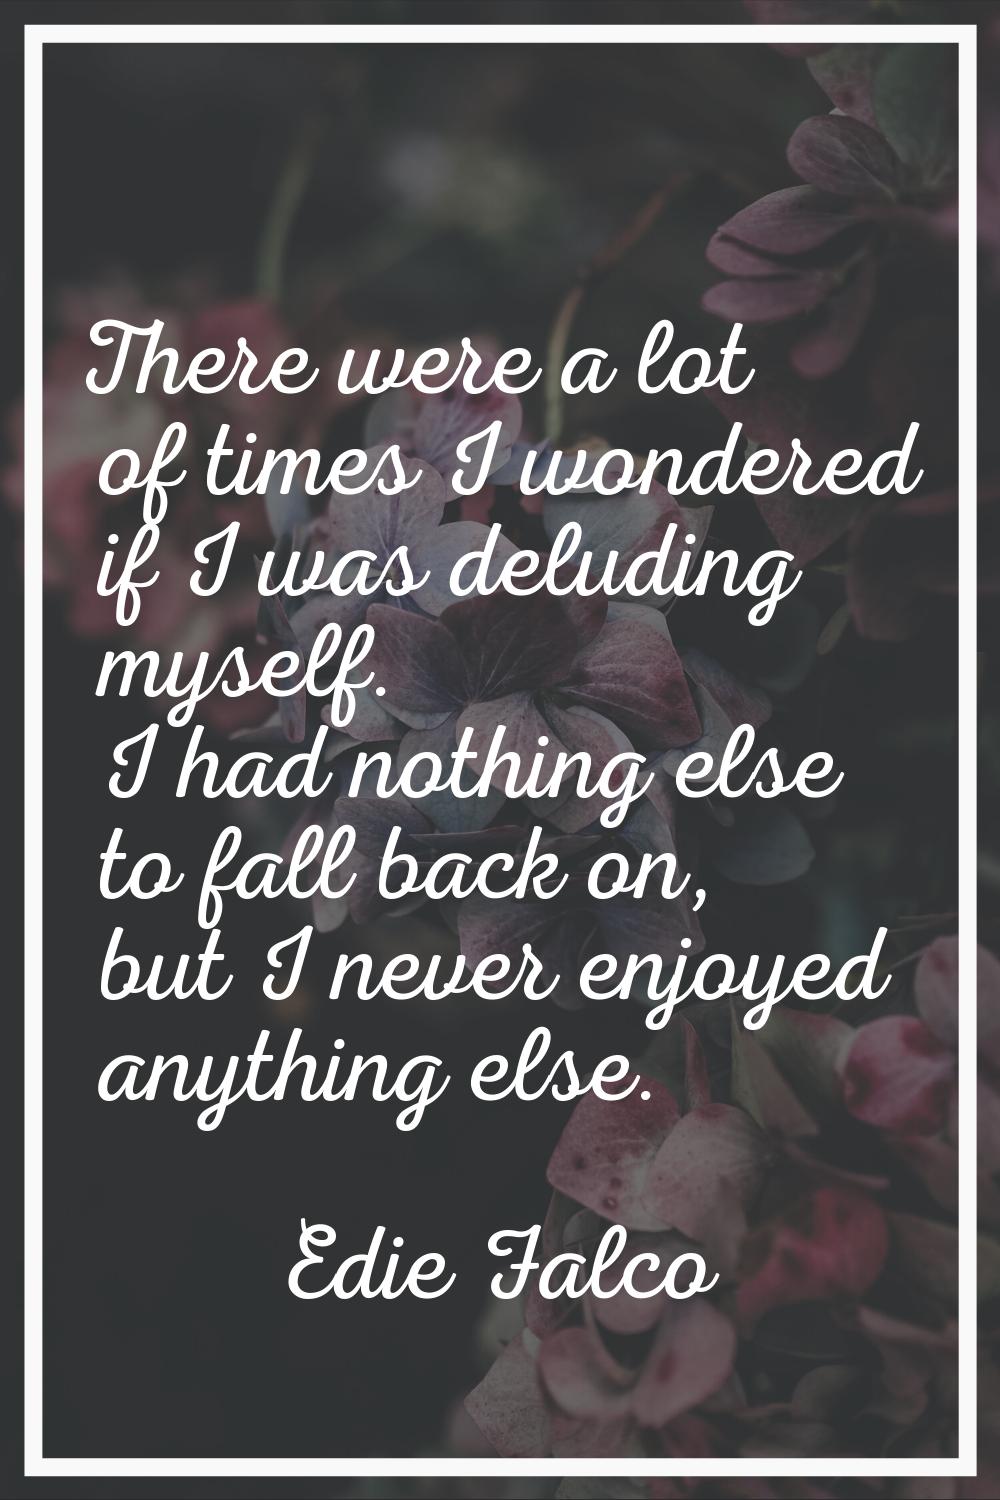 There were a lot of times I wondered if I was deluding myself. I had nothing else to fall back on, 